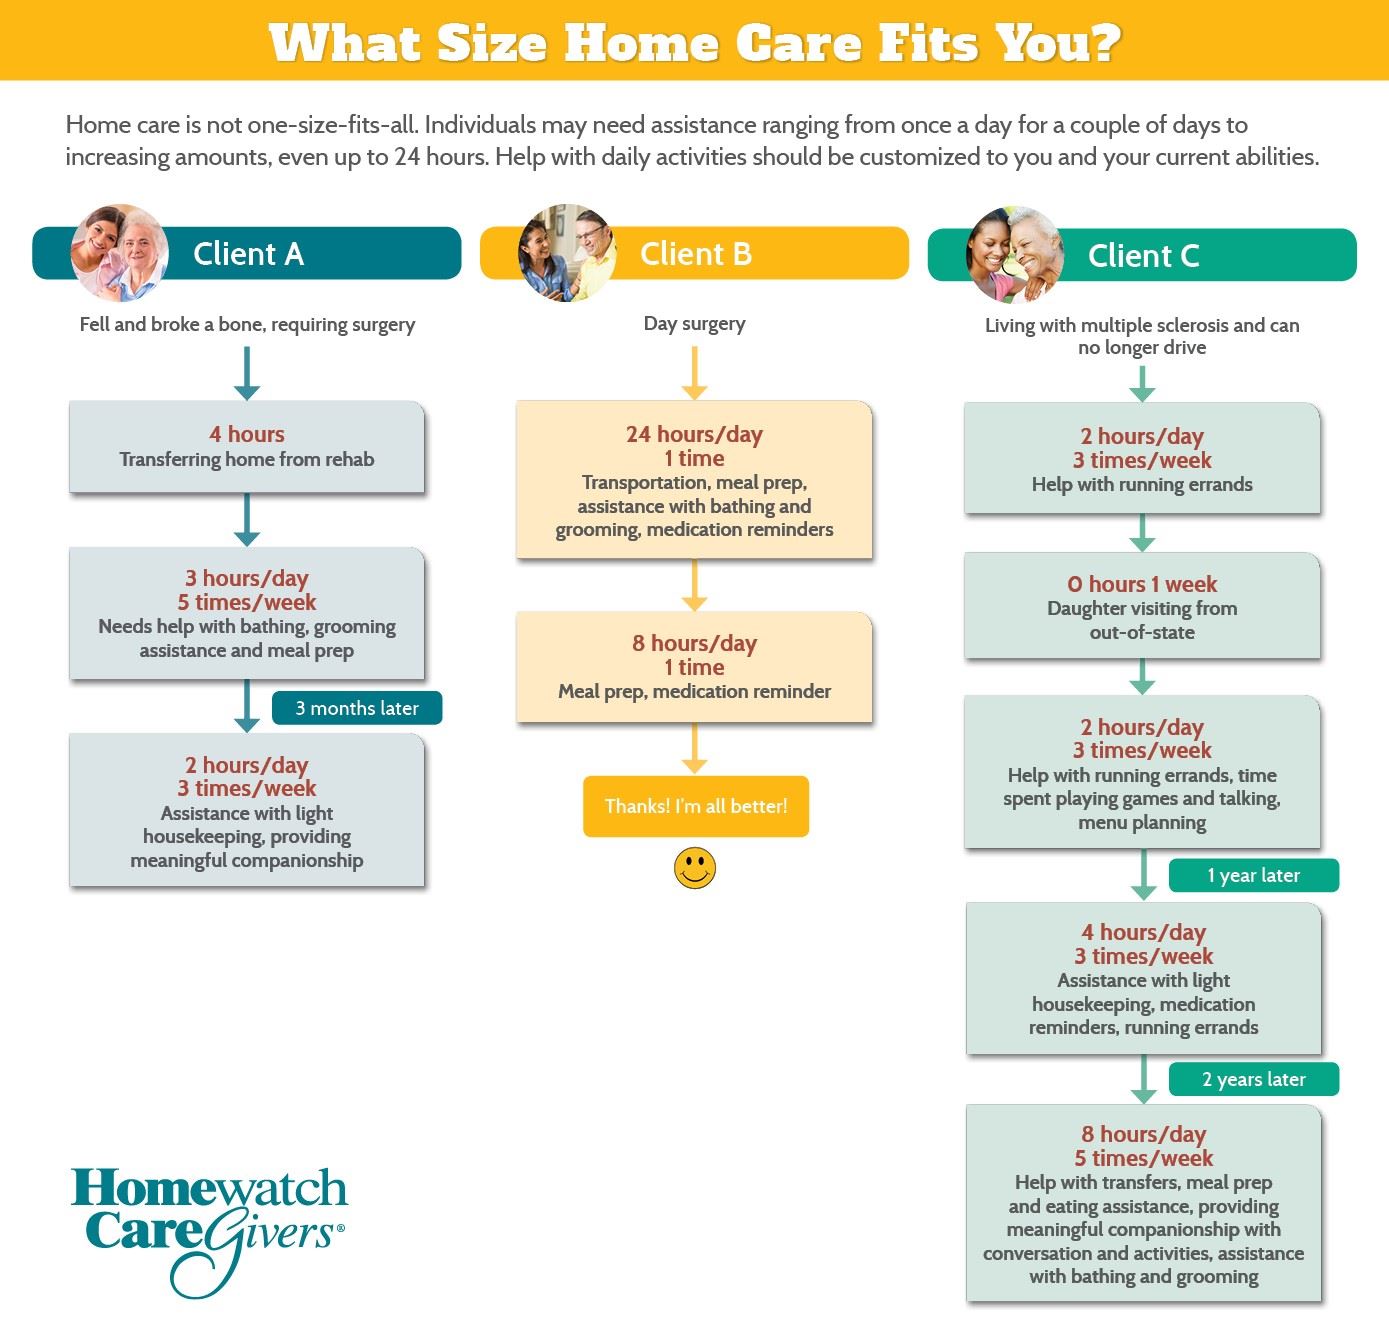 What Size Home Care Fits You infographic showing three different clients and the types of care recommended